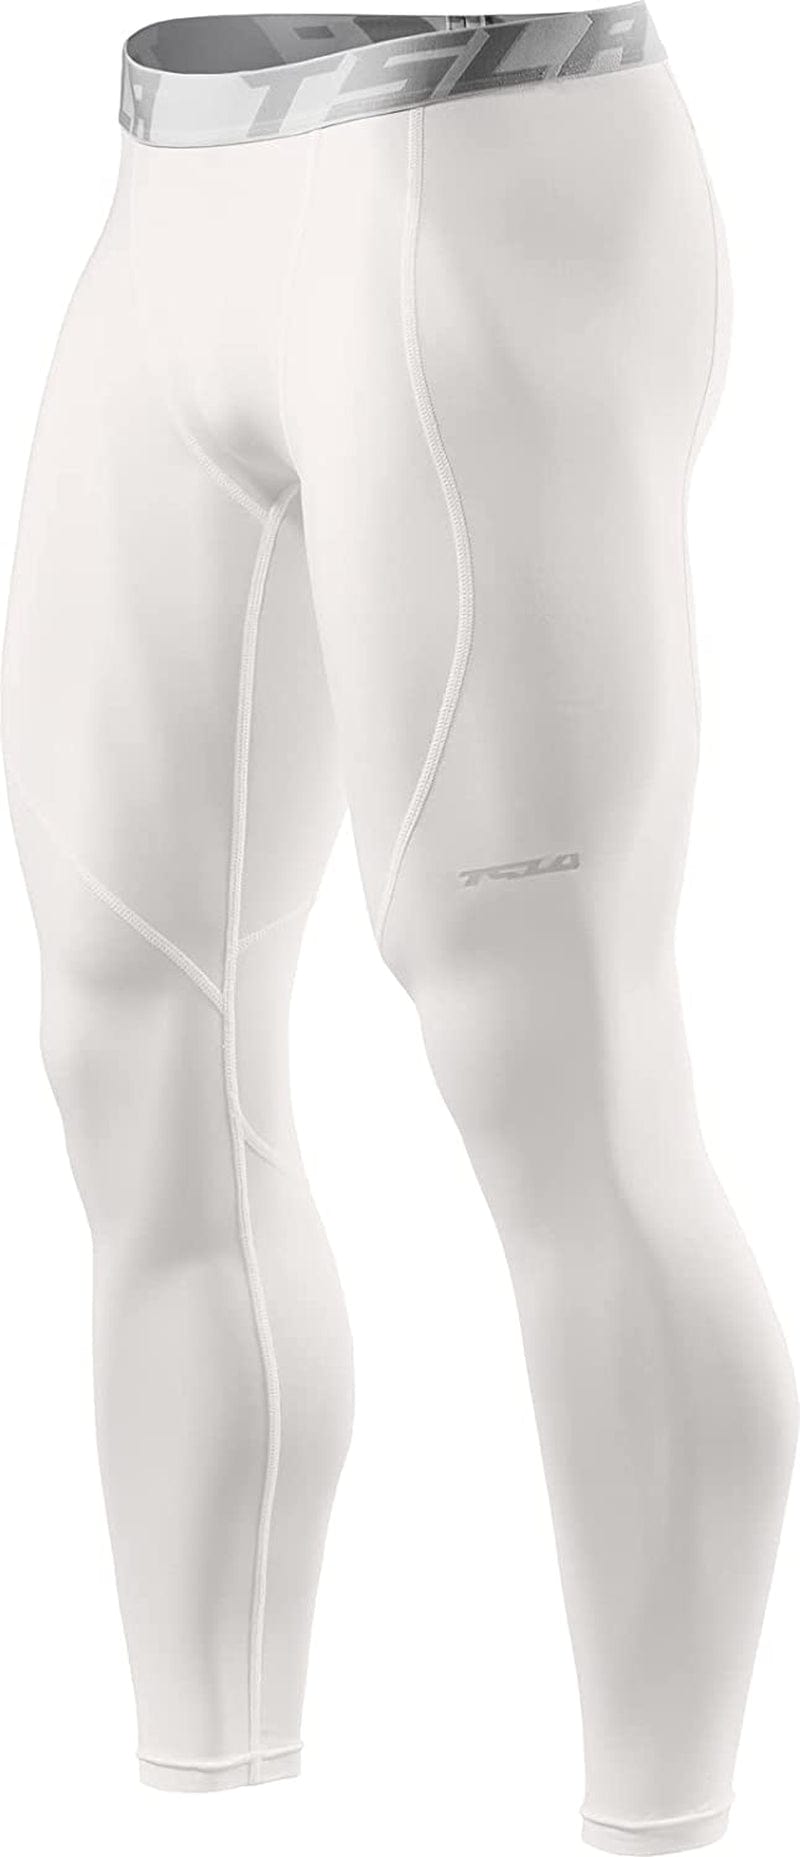 TSLA 1 or 2 Pack Men'S Thermal Compression Pants, Athletic Sports Leggings & Running Tights, Wintergear Base Layer Bottoms Sporting Goods > Outdoor Recreation > Winter Sports & Activities Tesla Gears Heatlock White XX-Large 